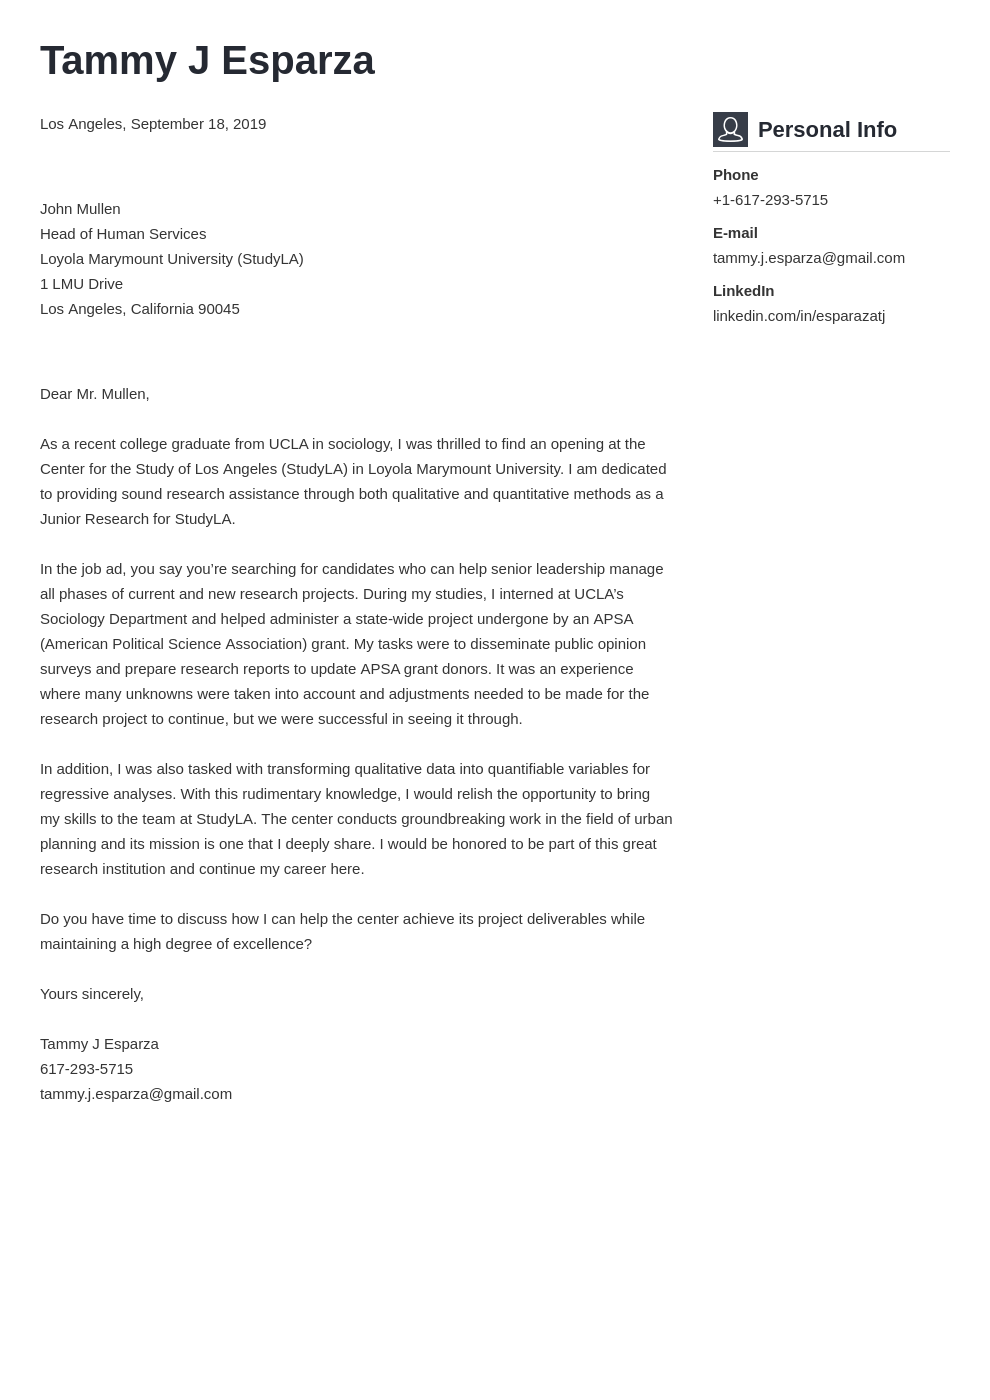 Research Assistant Cover Letter  No Experience & Mid-Level Examples